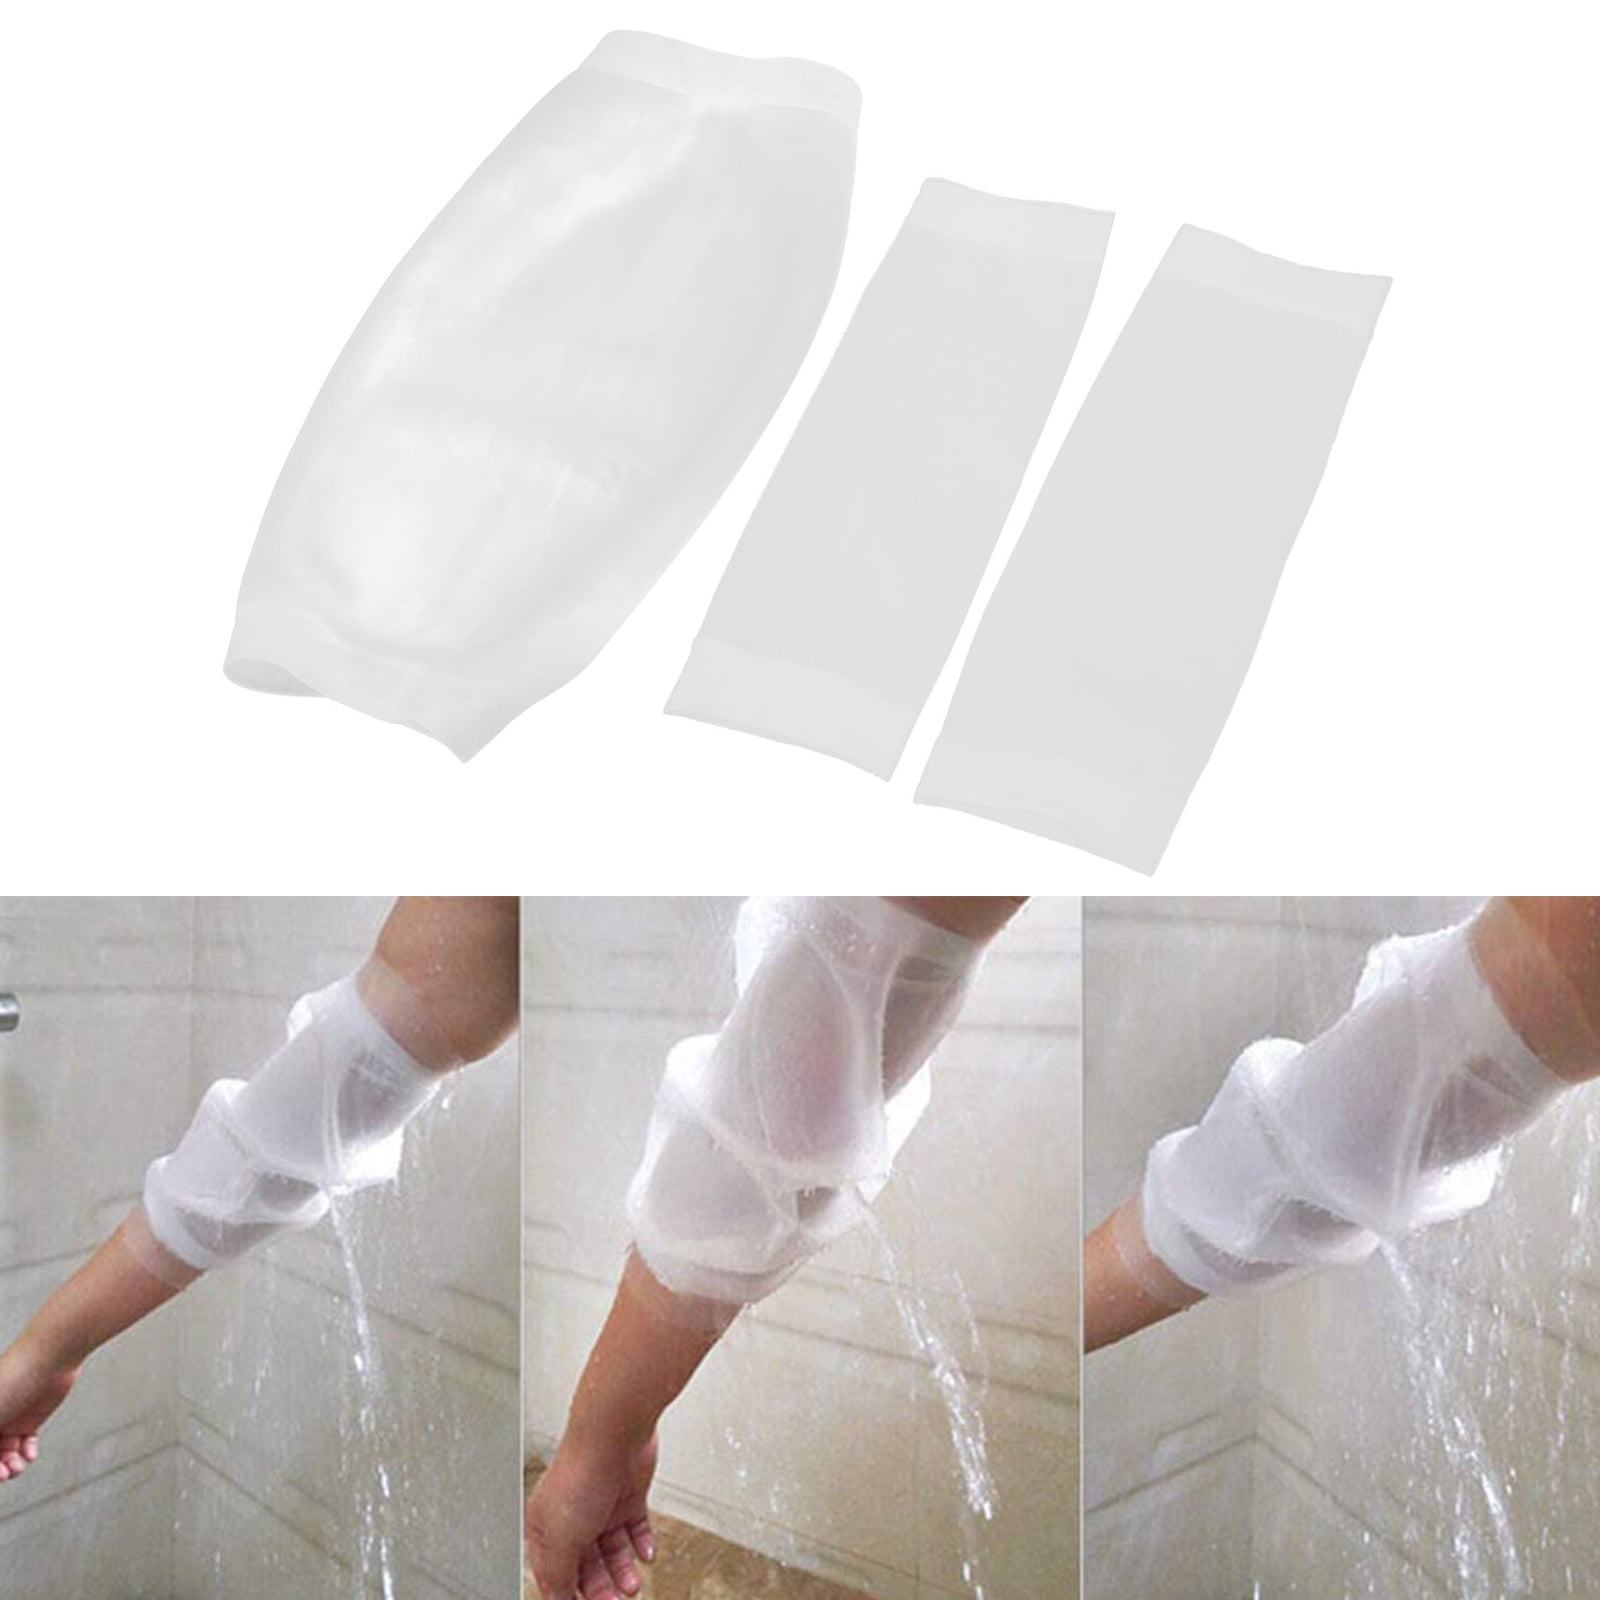 Details about   3 Pairs Transparent Clothes Printing Elastic Arm Covers Waterproof Arm Sleeves D 